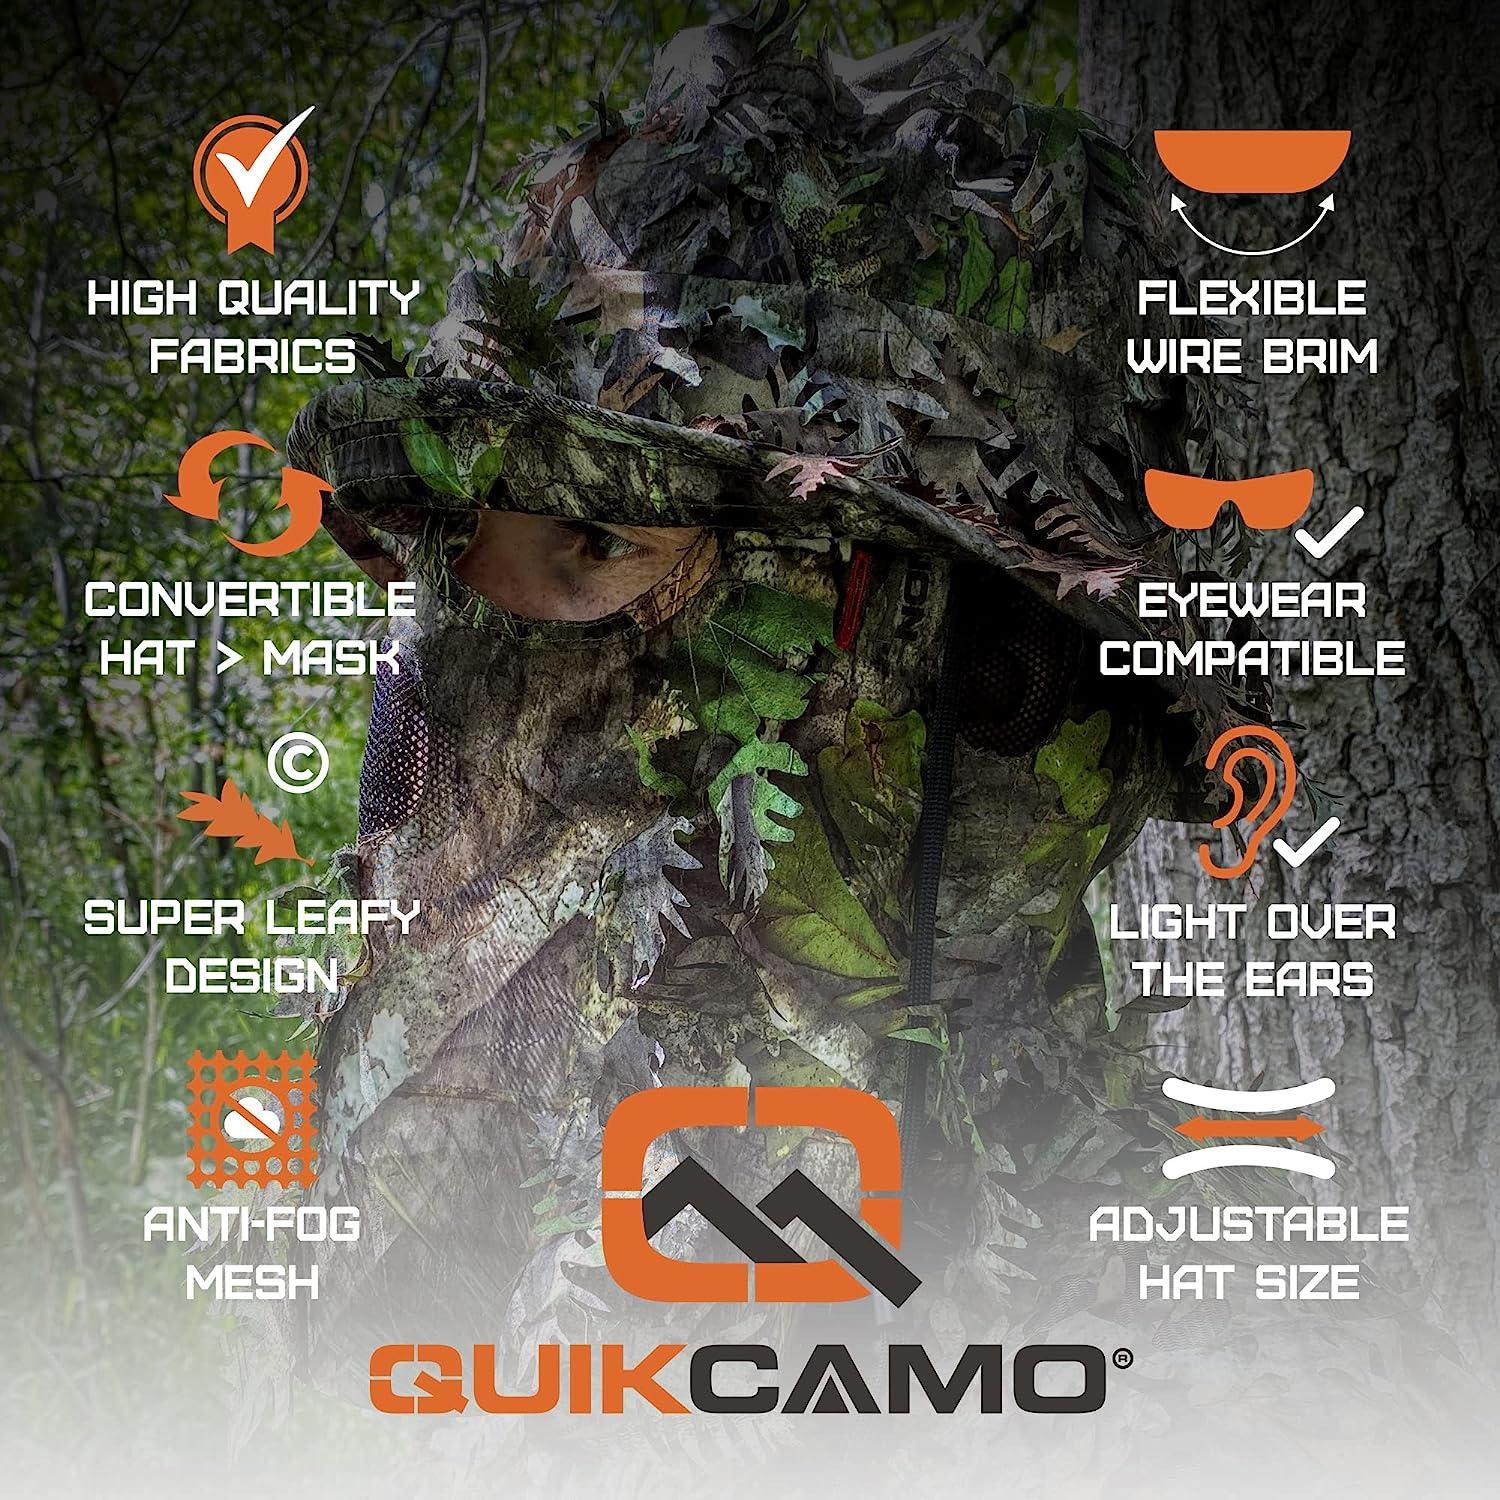 3D Leafy Camo Suit for Men Hunting, Mossy Oak and Realtree